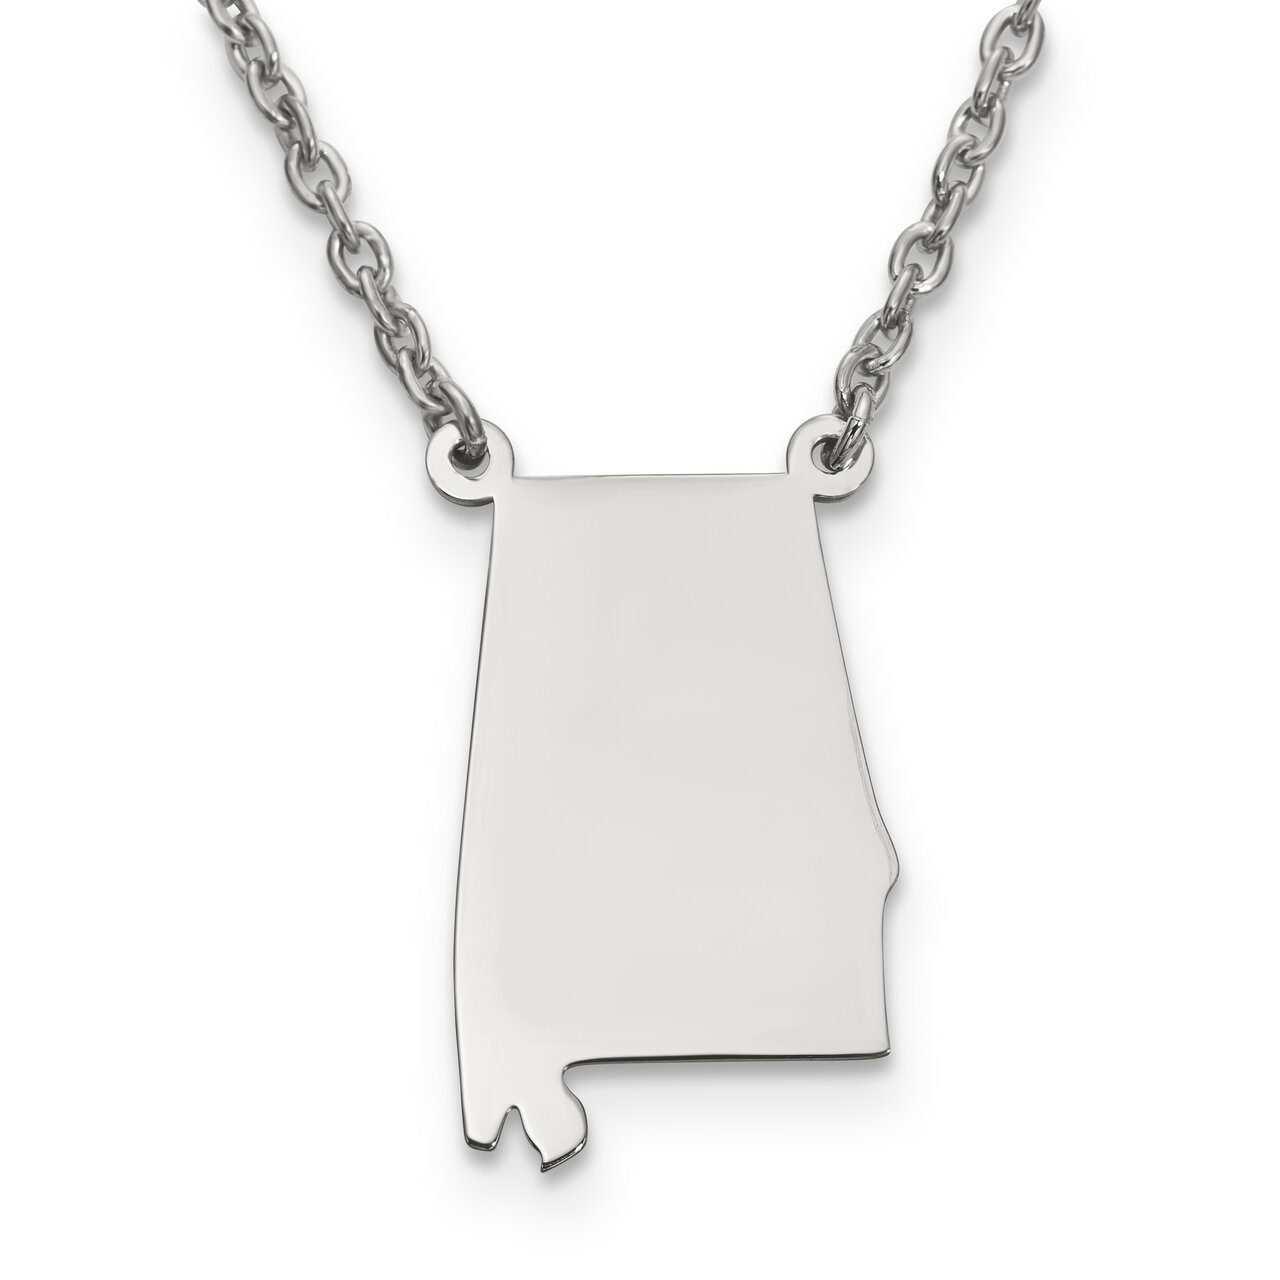 Alabama State Pendant Necklace with Chain 14k White Gold Engravable XNA706W-AL